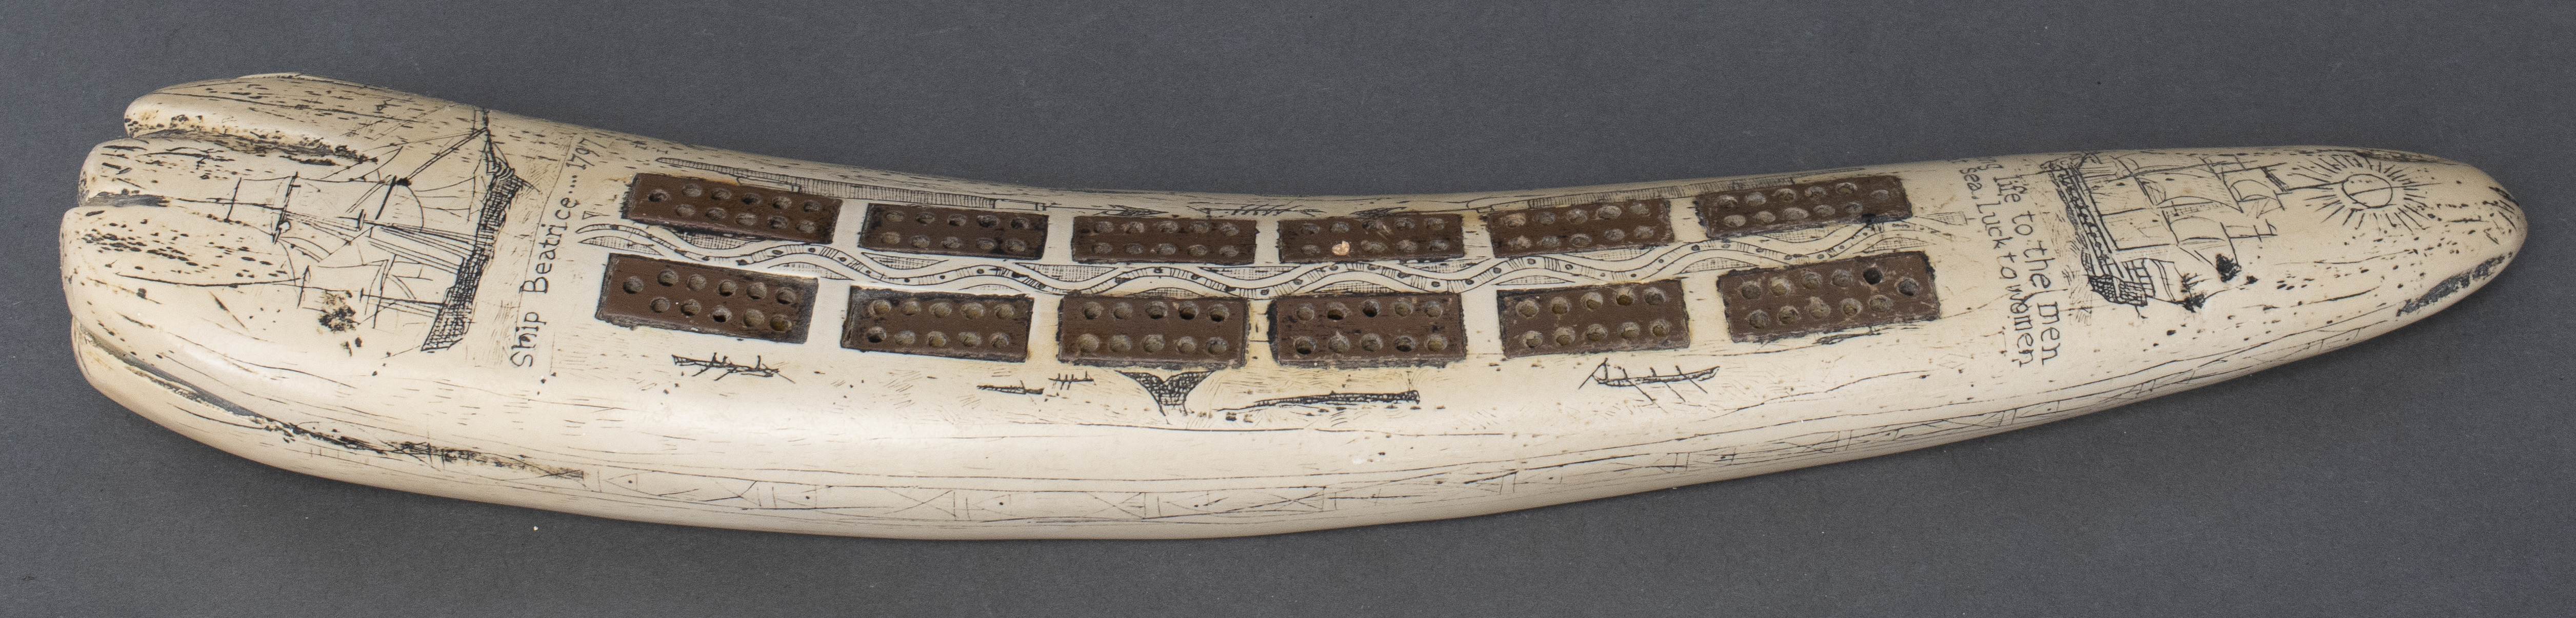 NAUTICAL MARITIME CARVED CRIBBAGE 3c4ff7